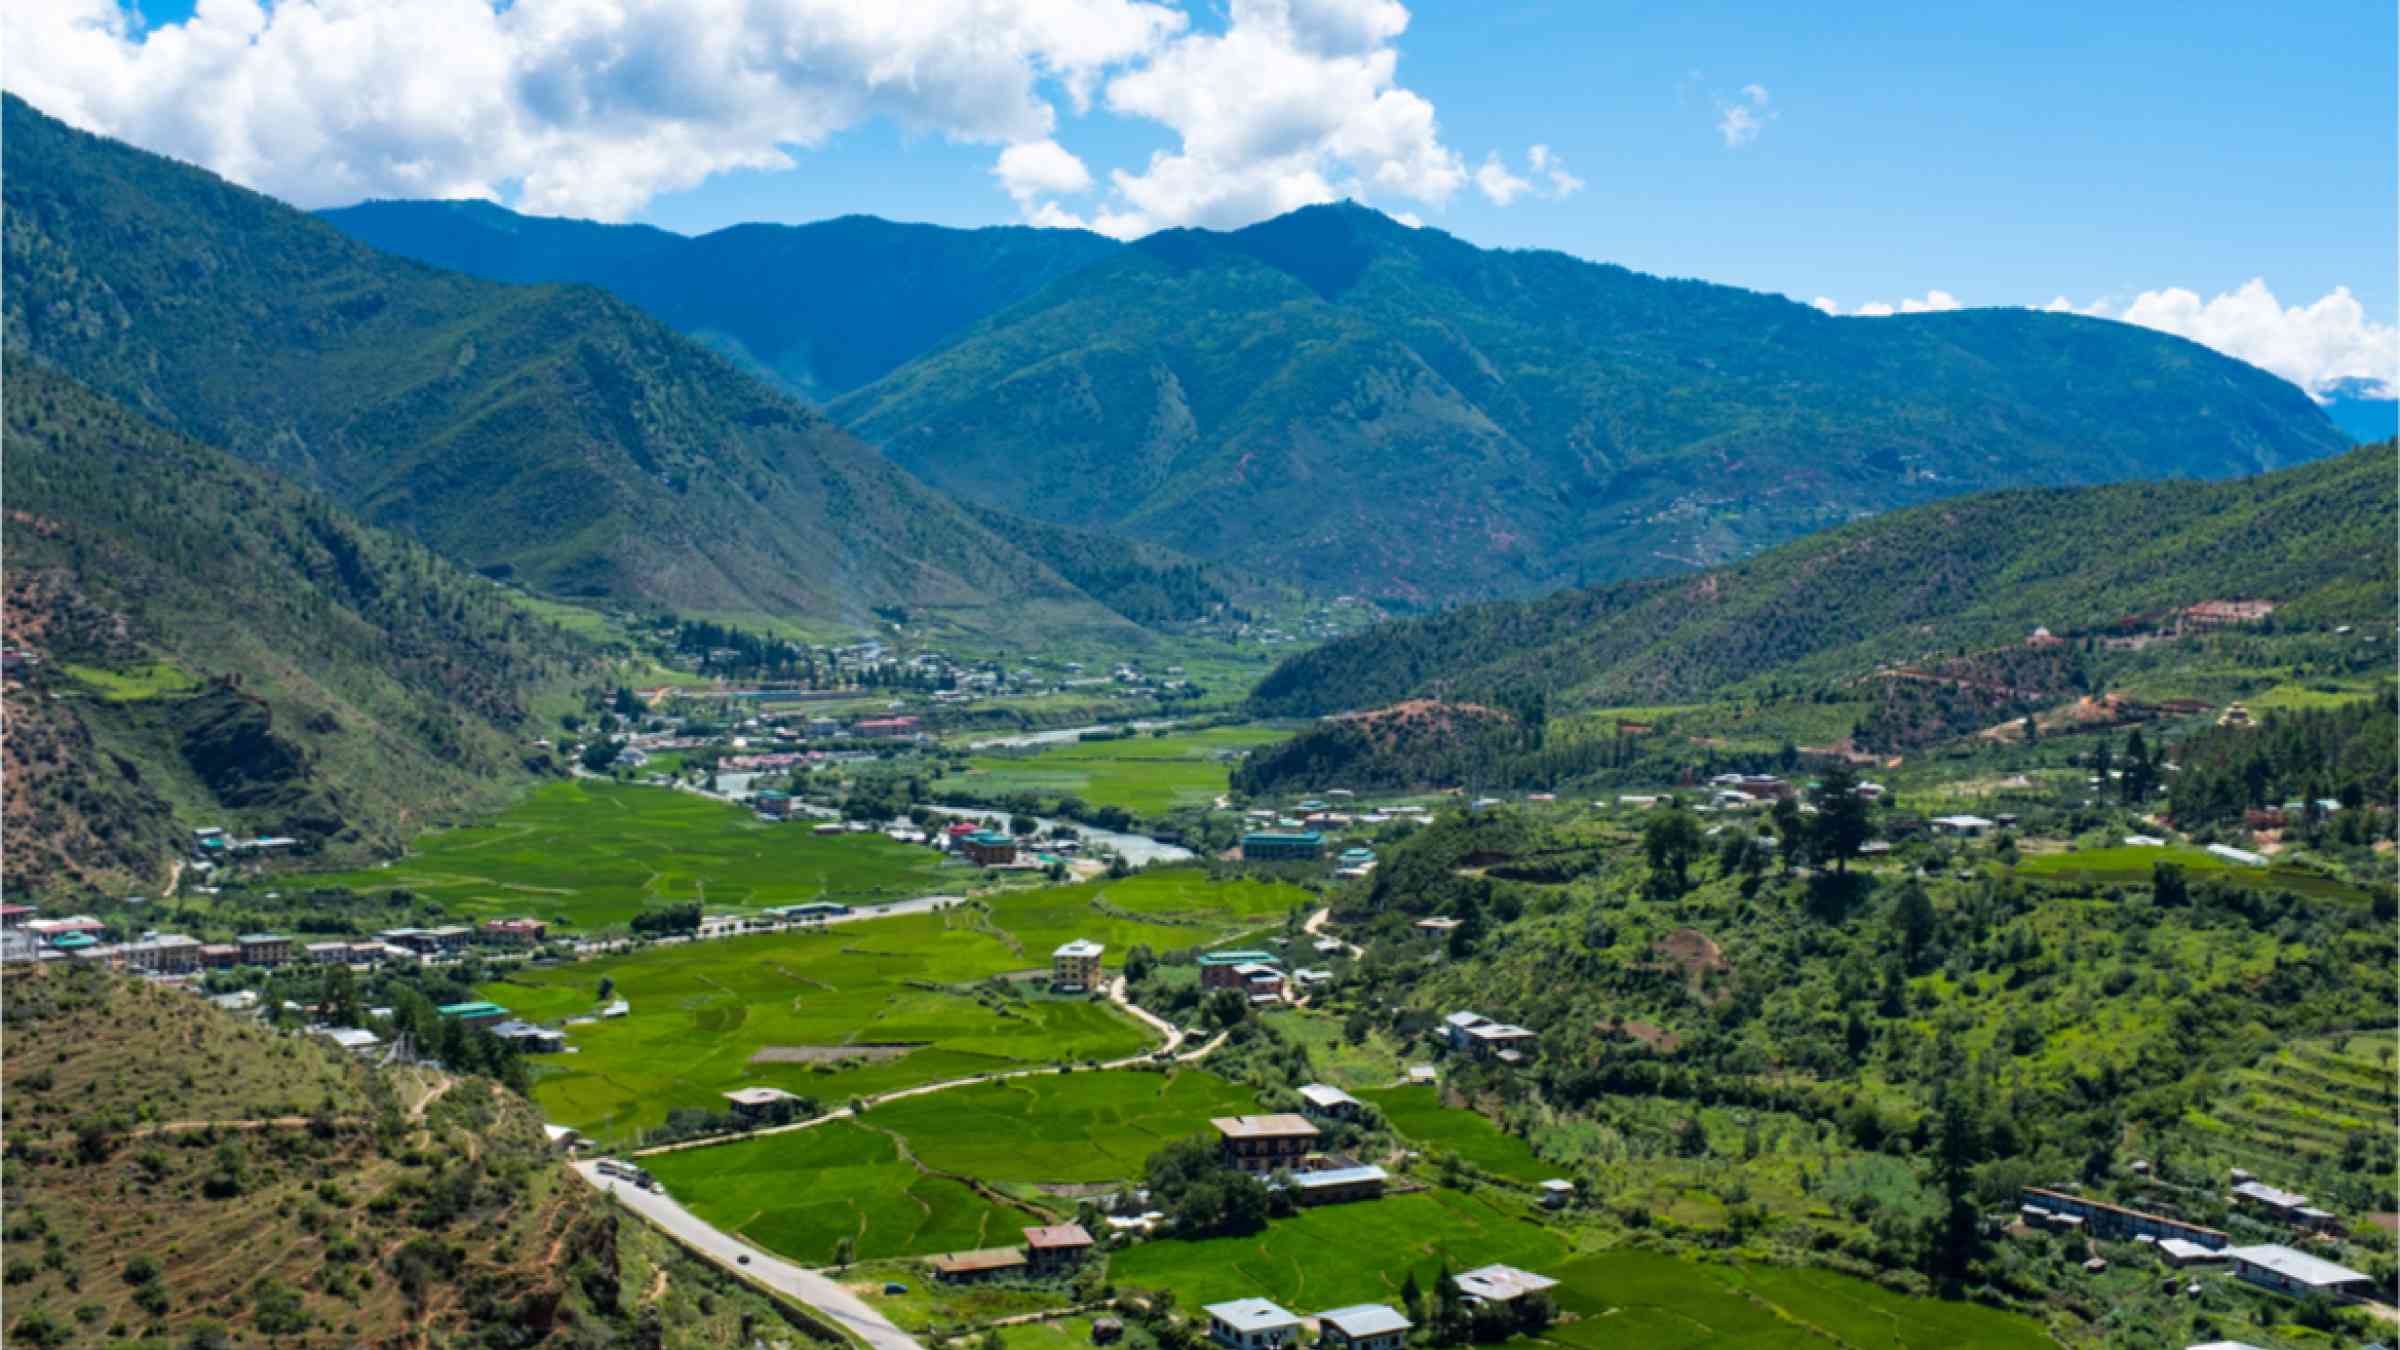 This is Paro city in the Kingdom of Bhutan.